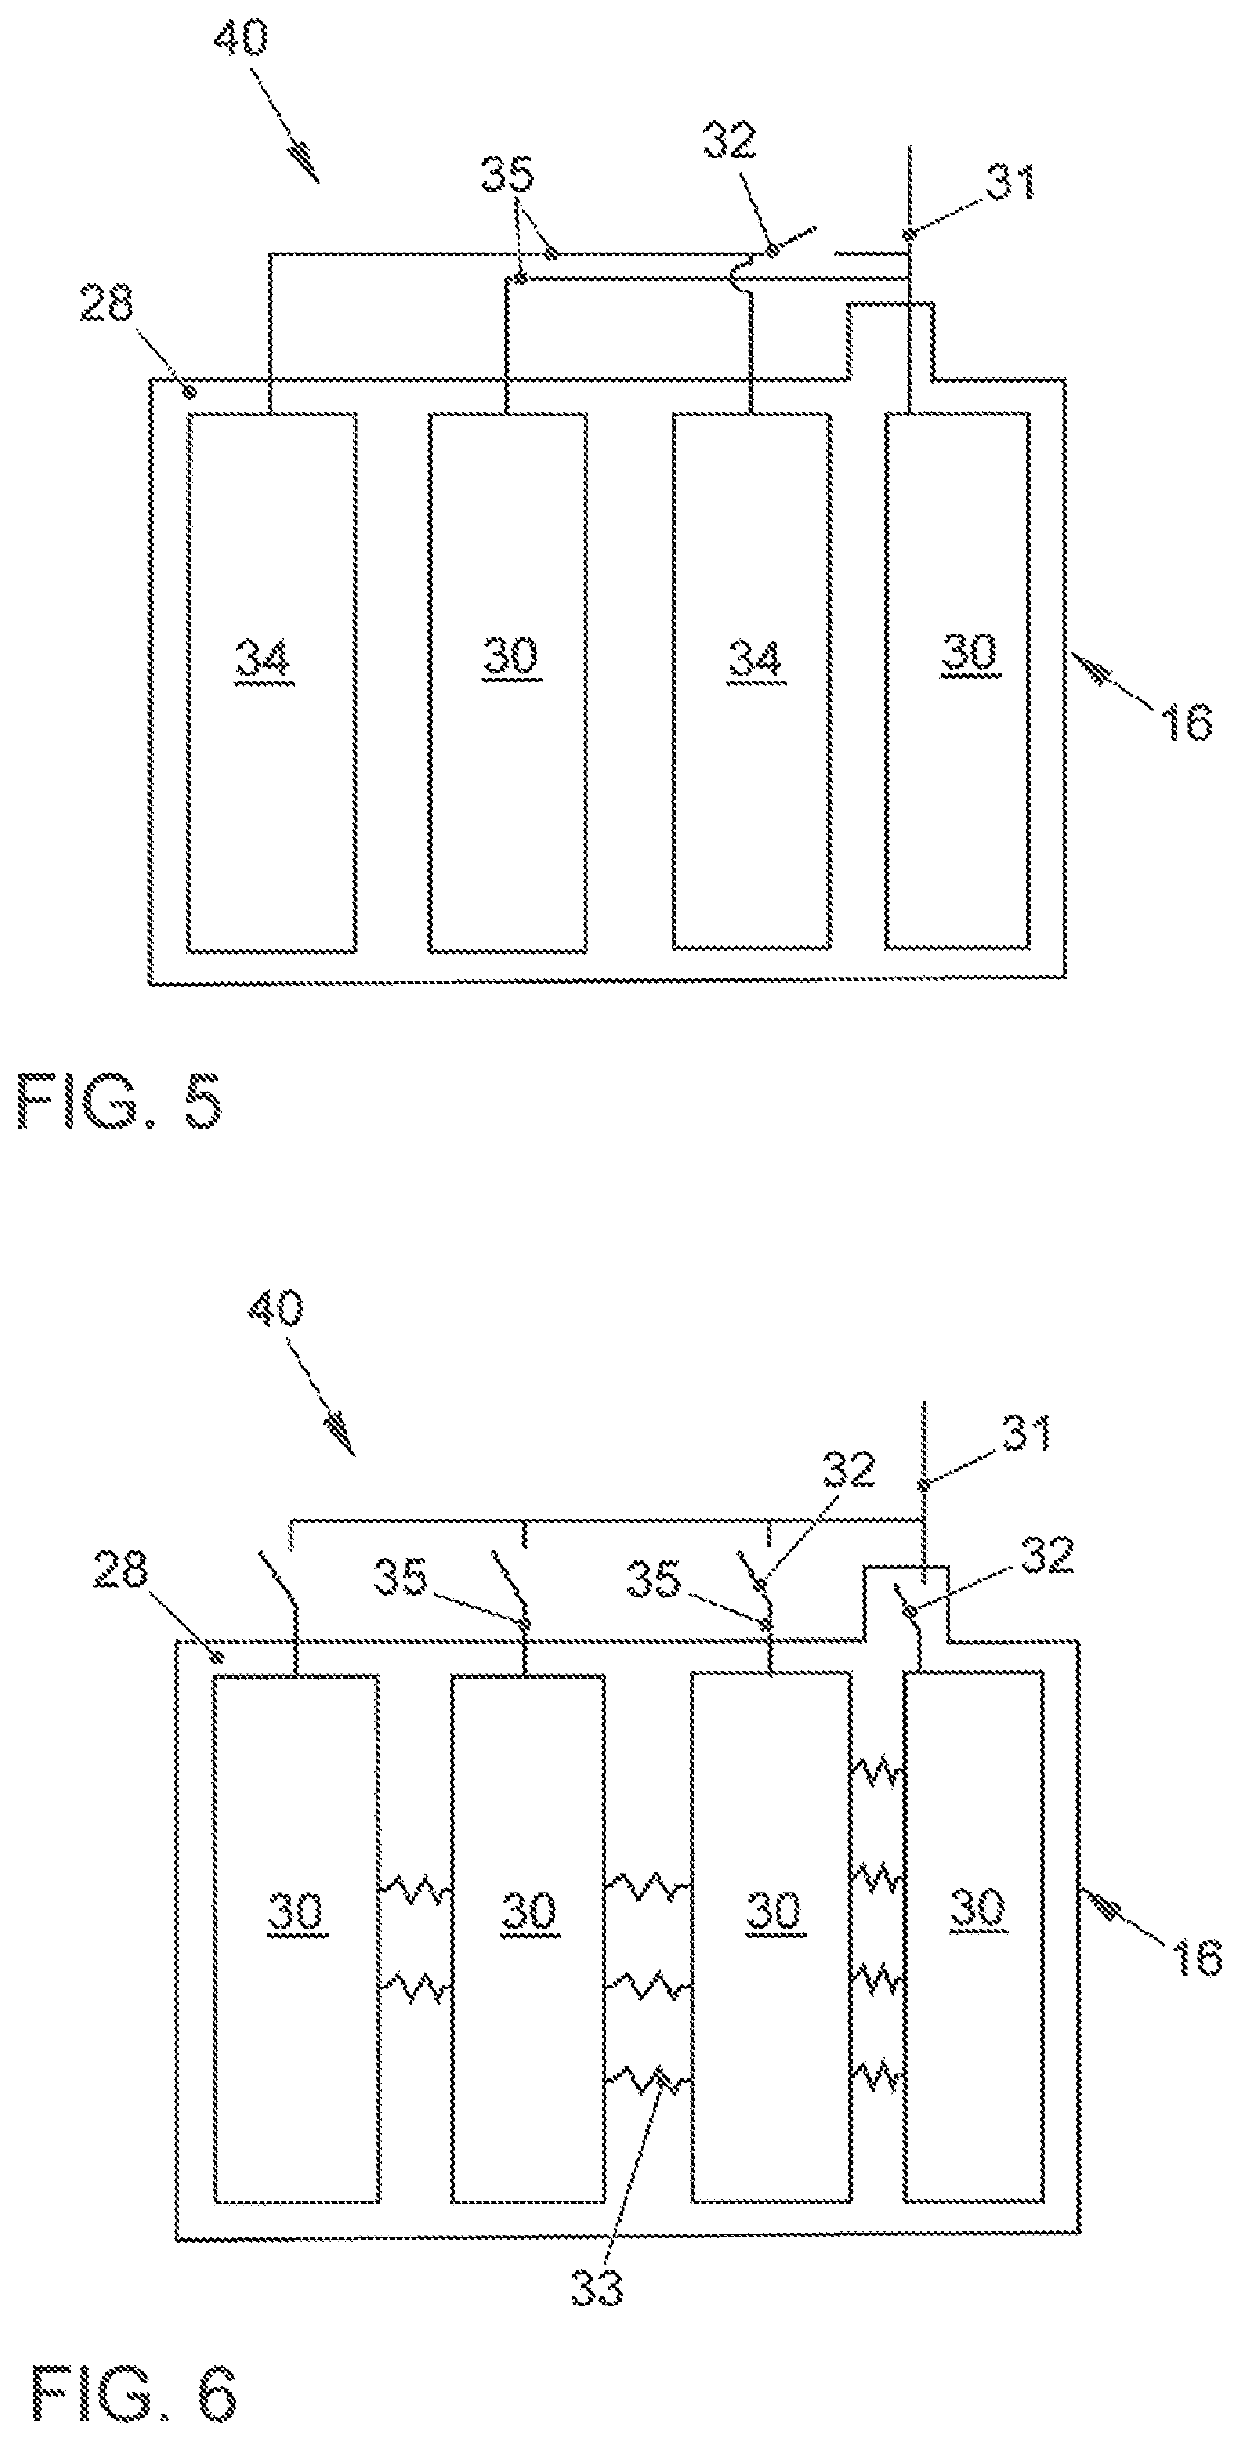 Electrical contact device for a fuel cell stack